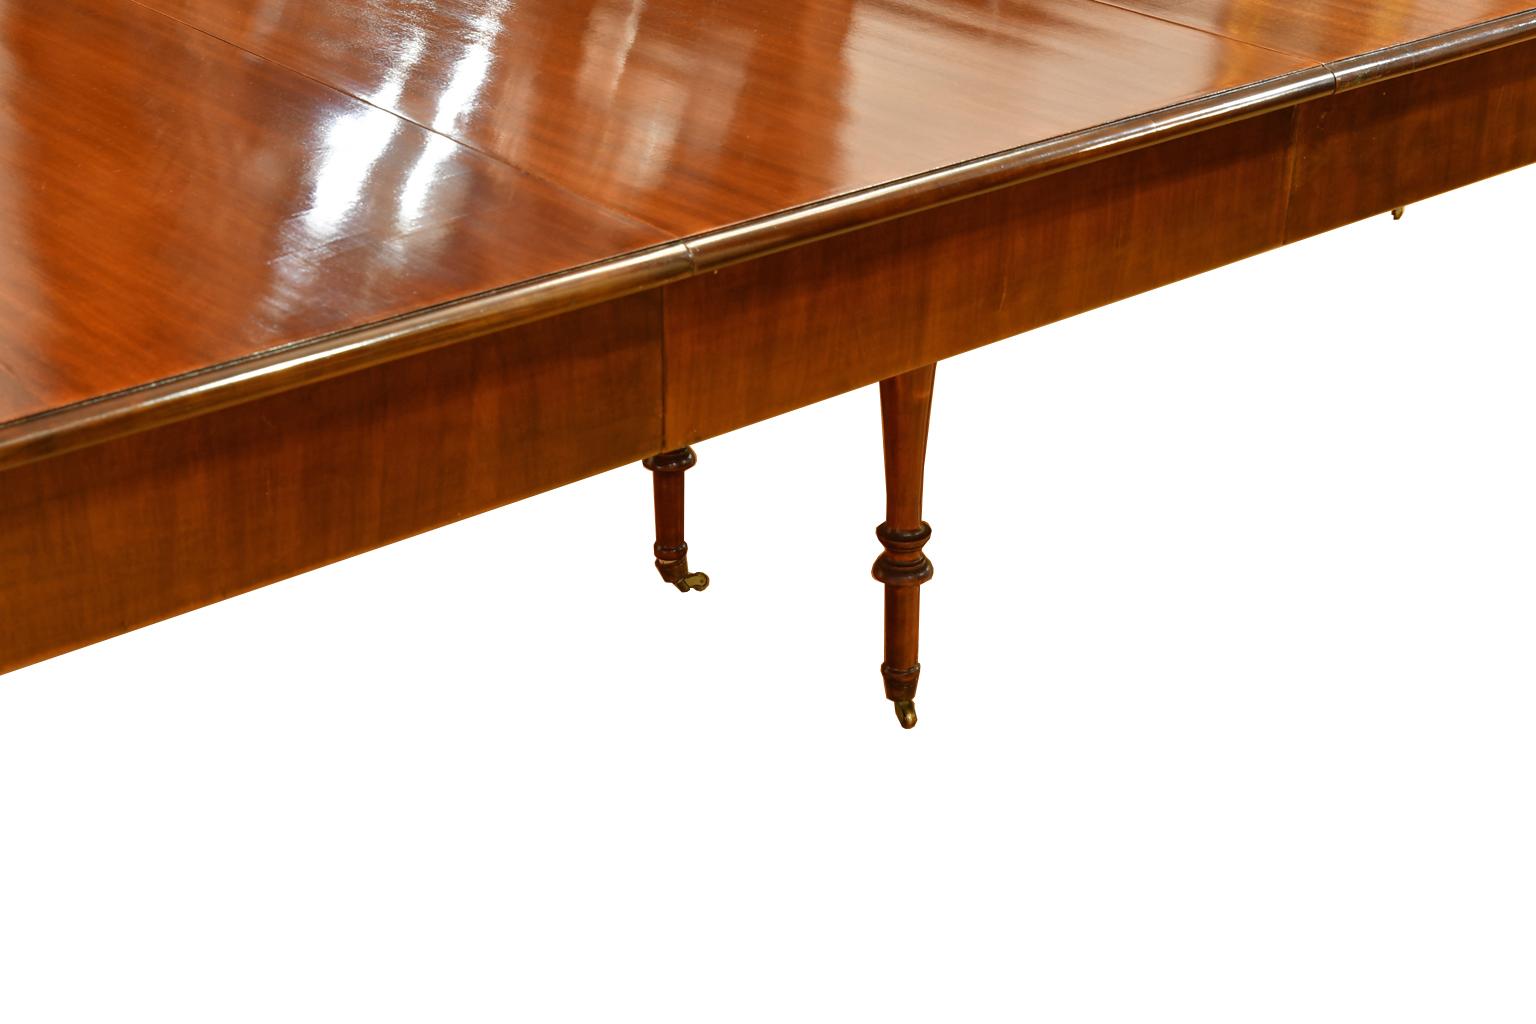 Antique 12 Foot Extension Dining Table in Mahogany w Racetrack Top & Four Leaves 6